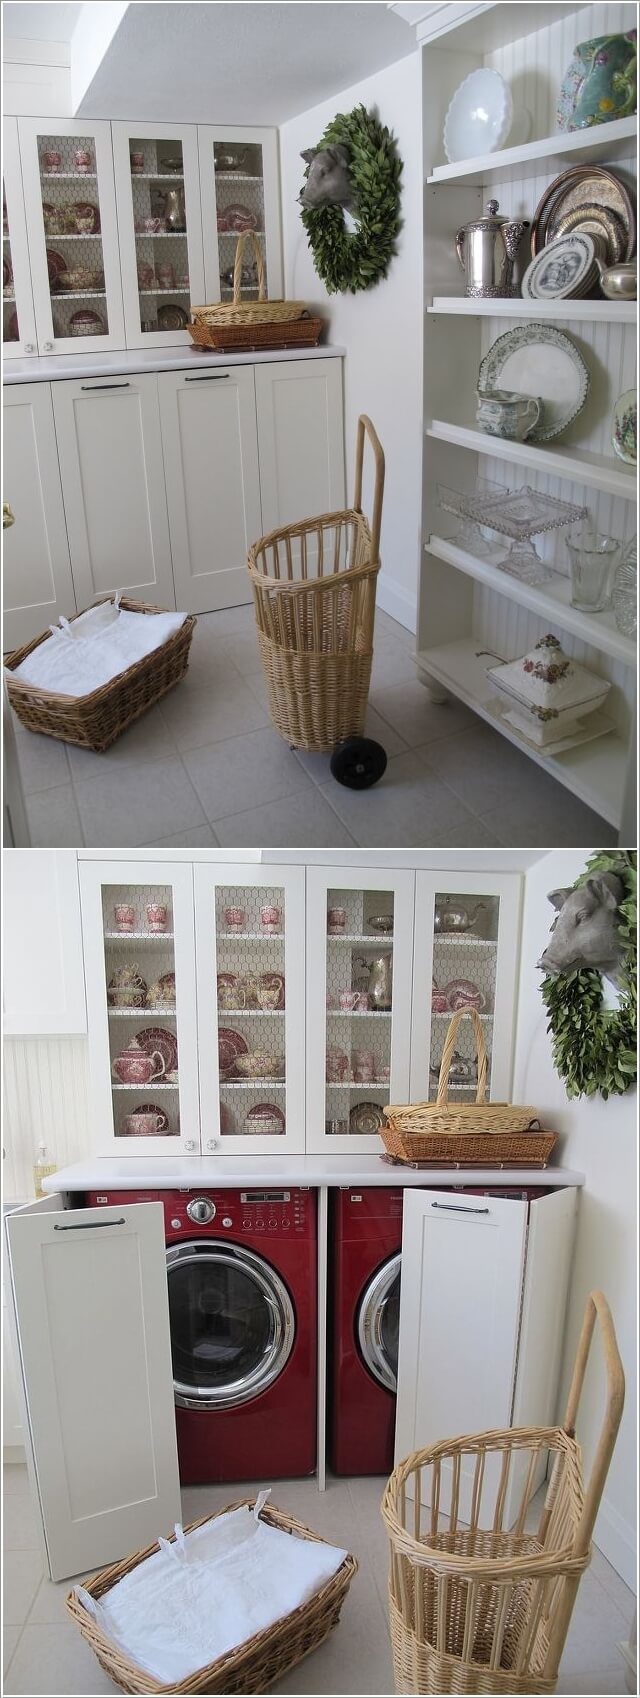 10 Clever Hidden Storage Ideas for Your Home 5